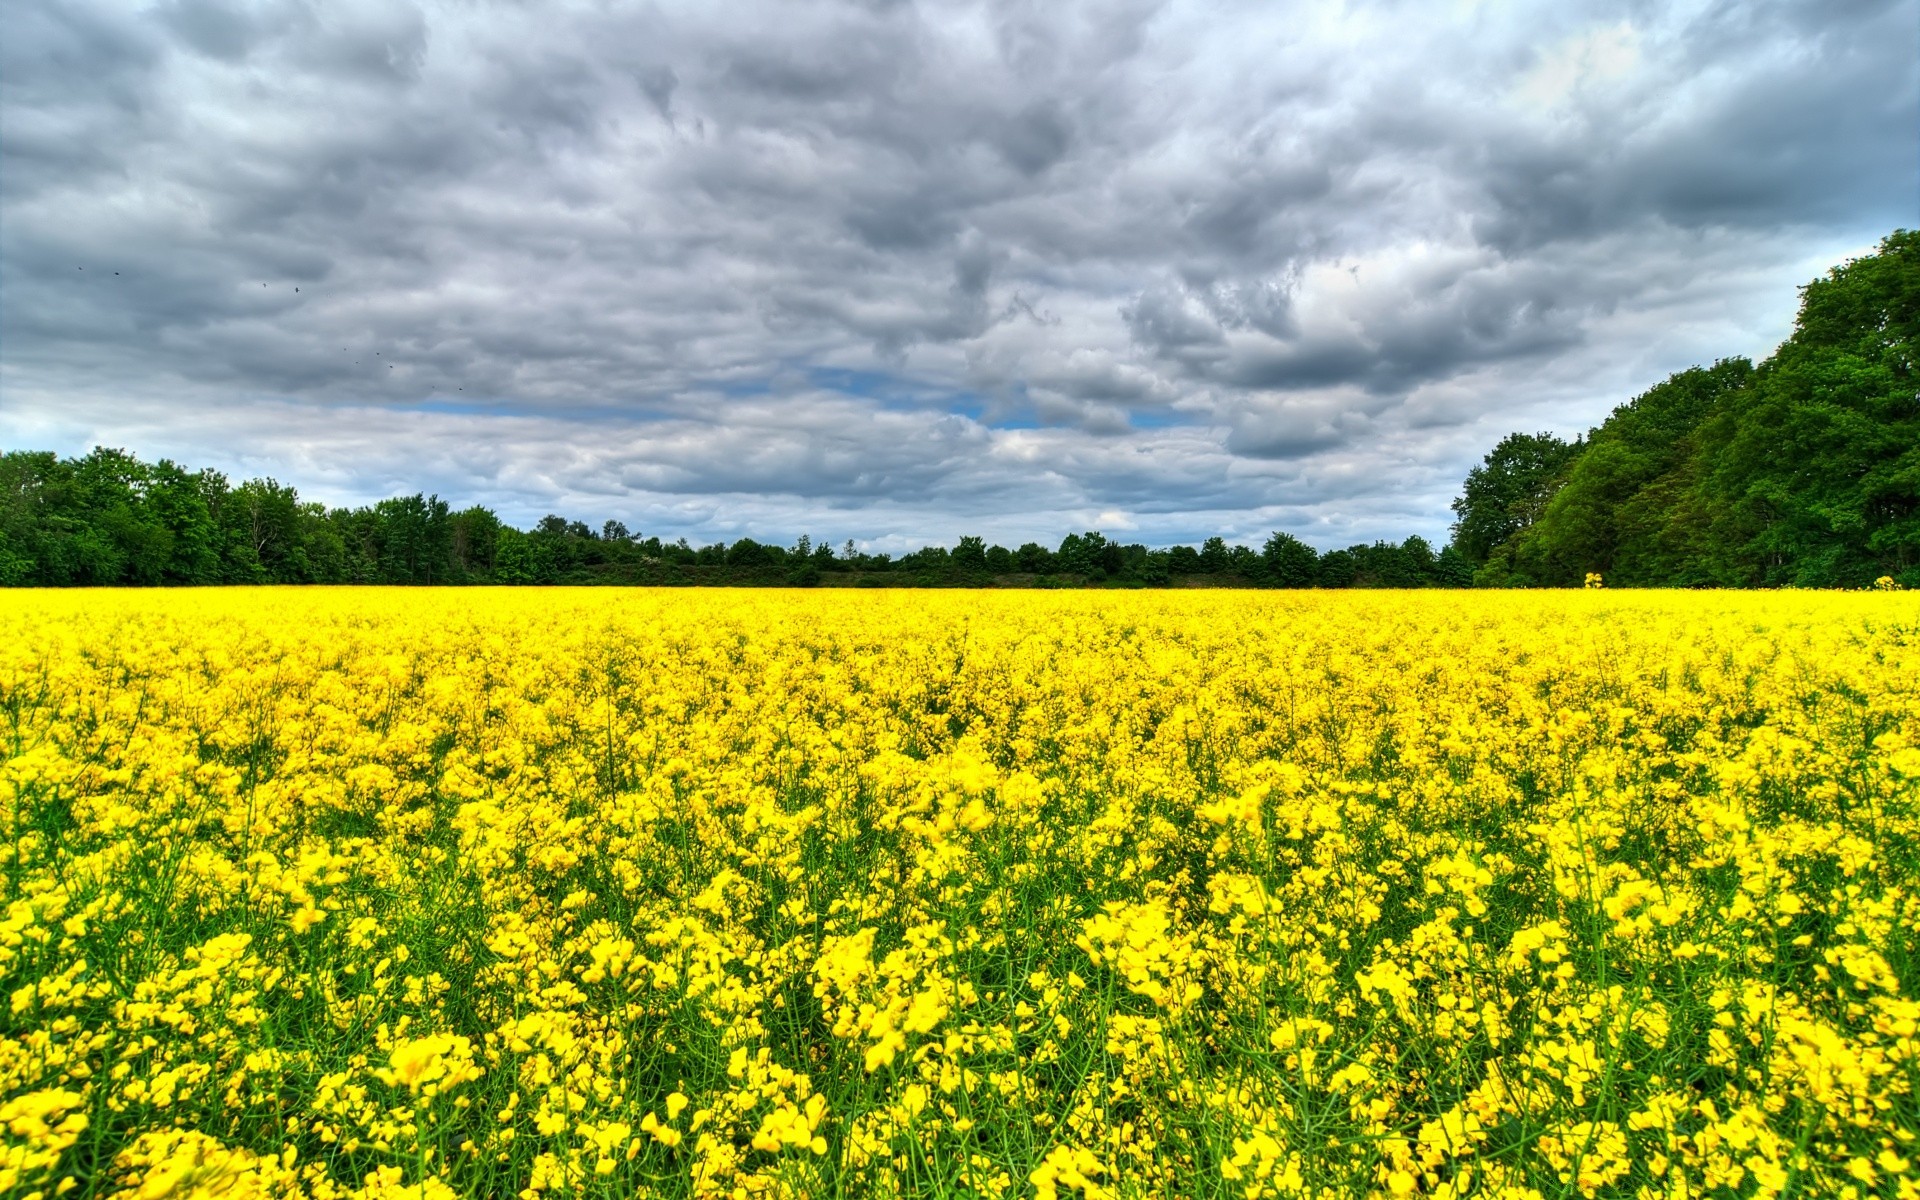 landscapes agriculture field crop farm rural landscape nature flower flora countryside hayfield summer outdoors oil environment soil oilseed growth pasture